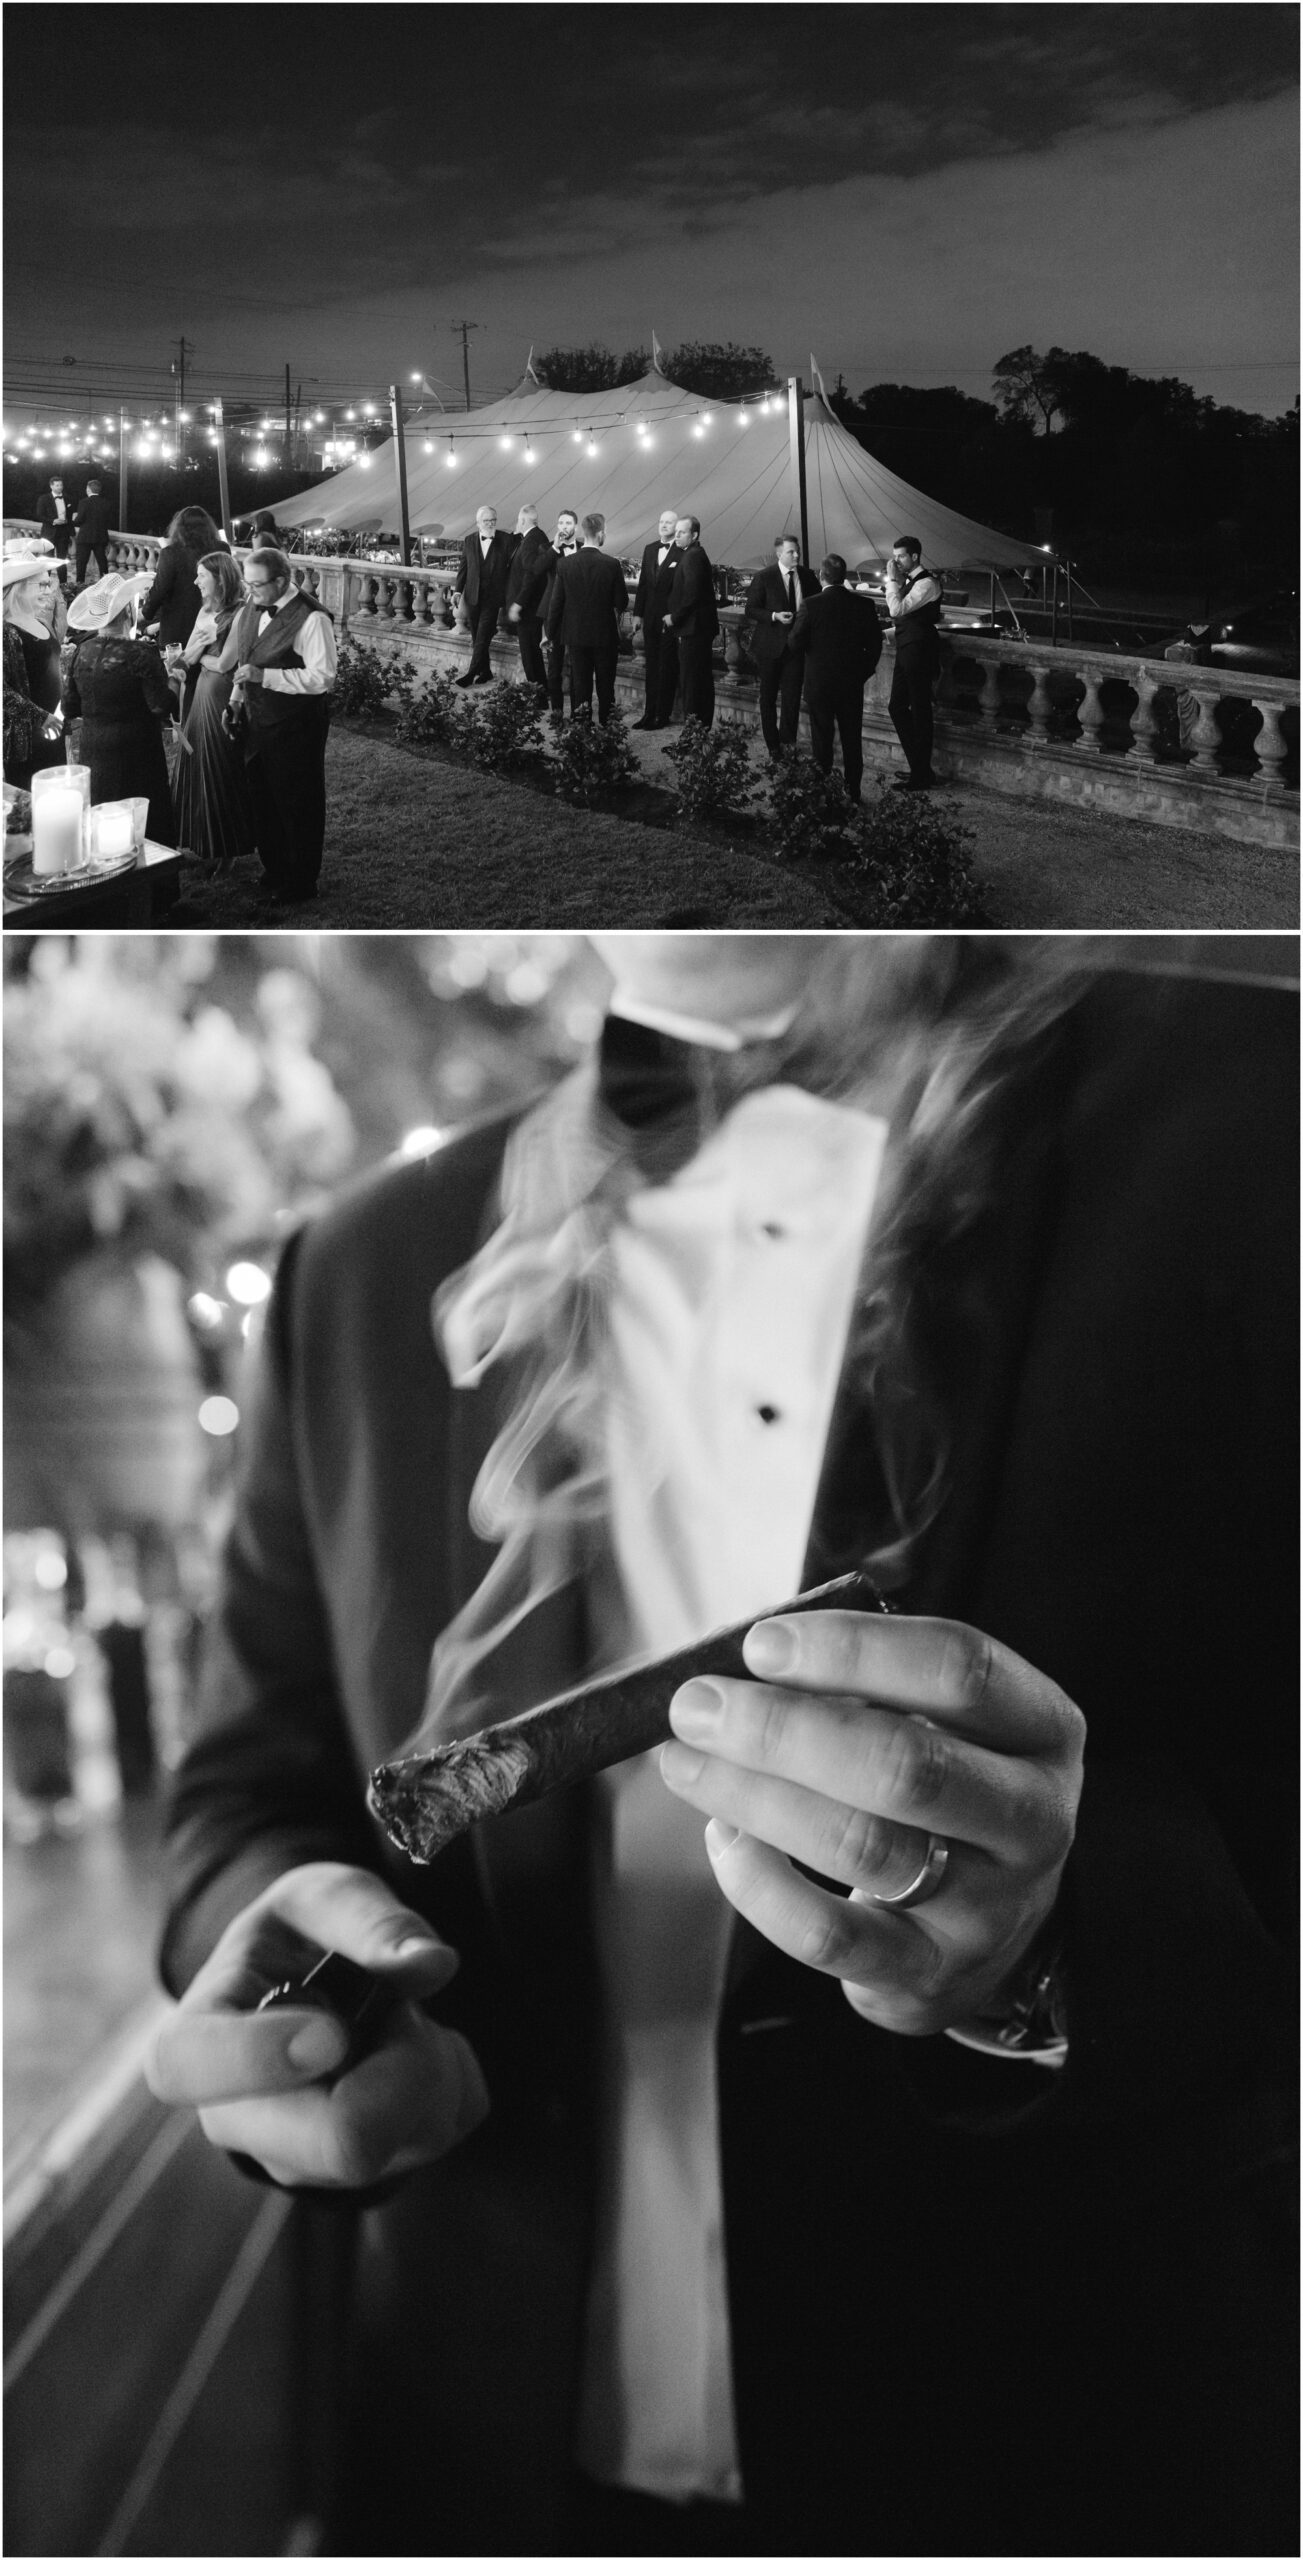 wedding reception at night in black and white